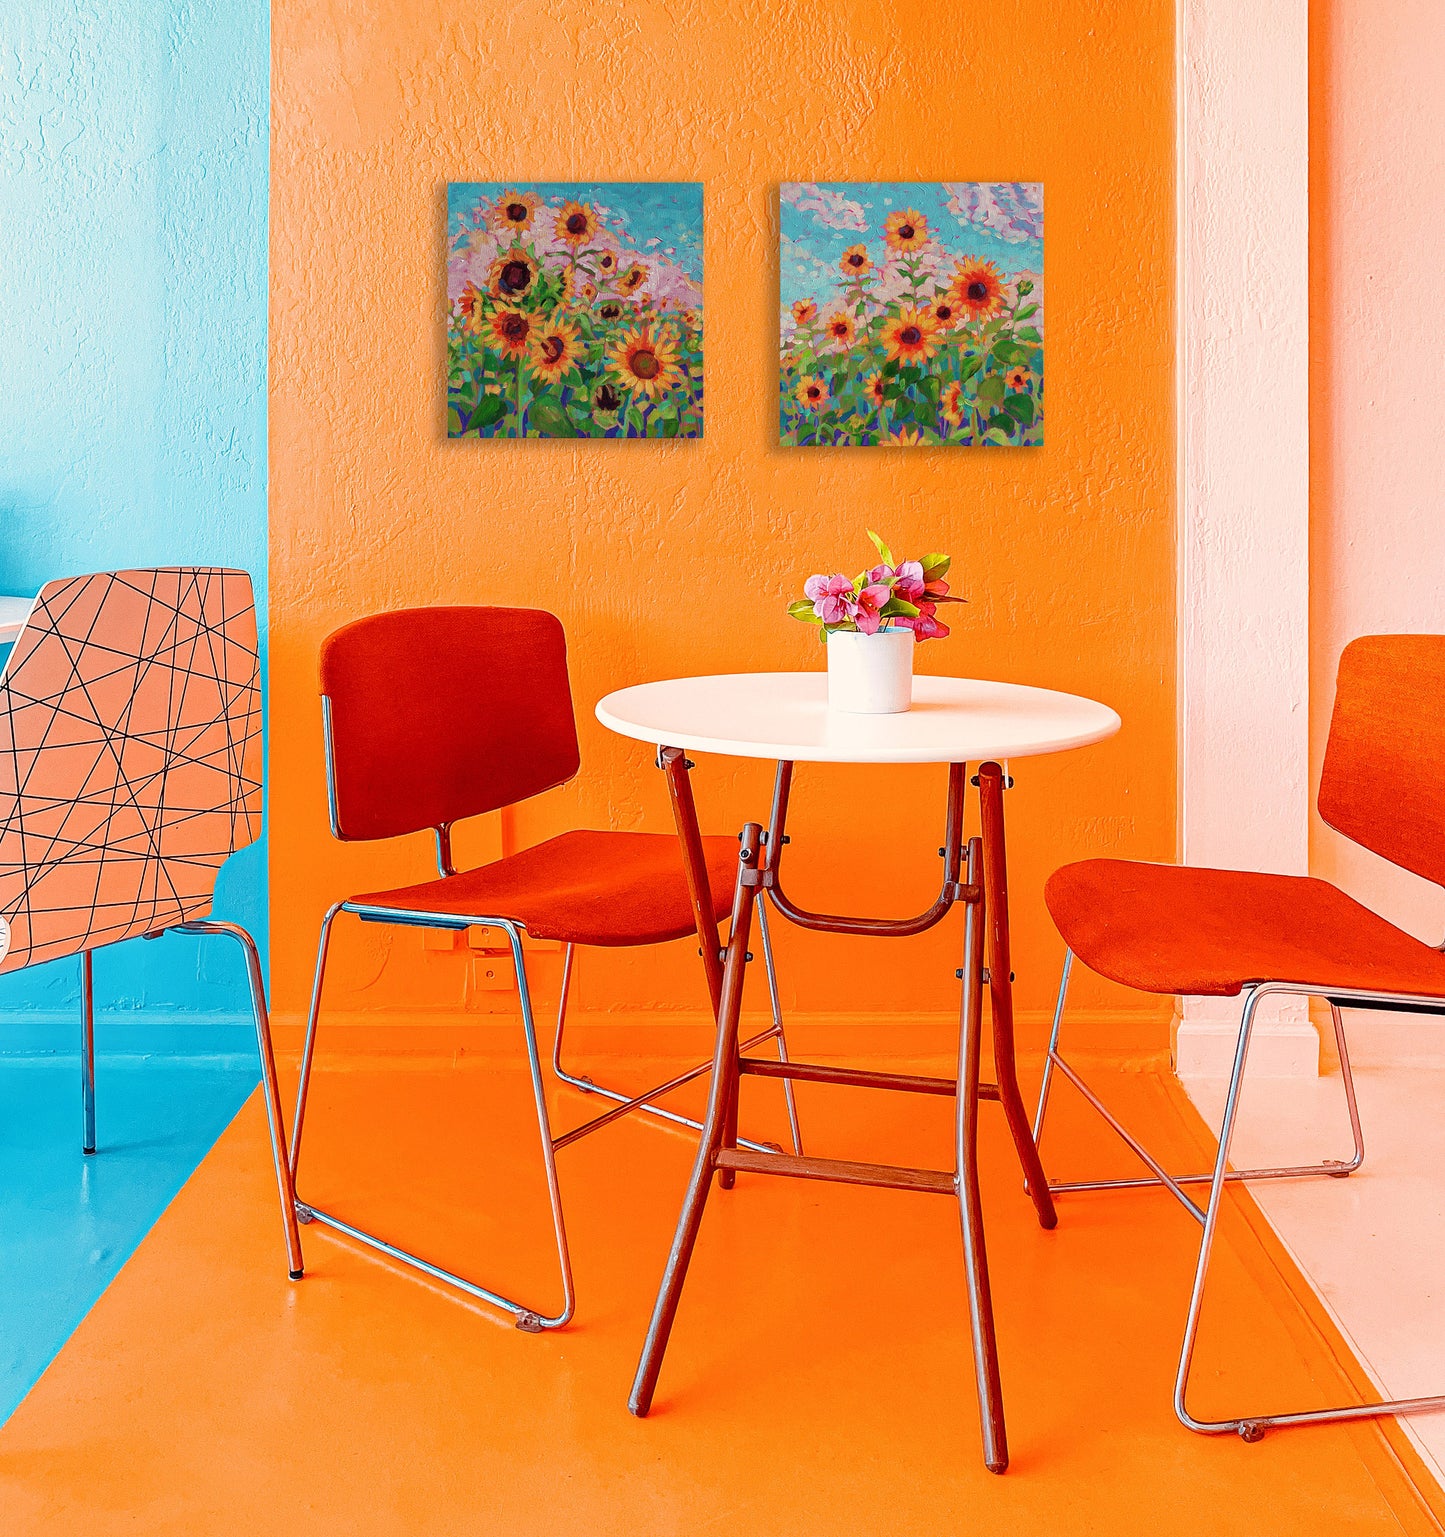 2 sunflower paintings in orange room with table and chairs